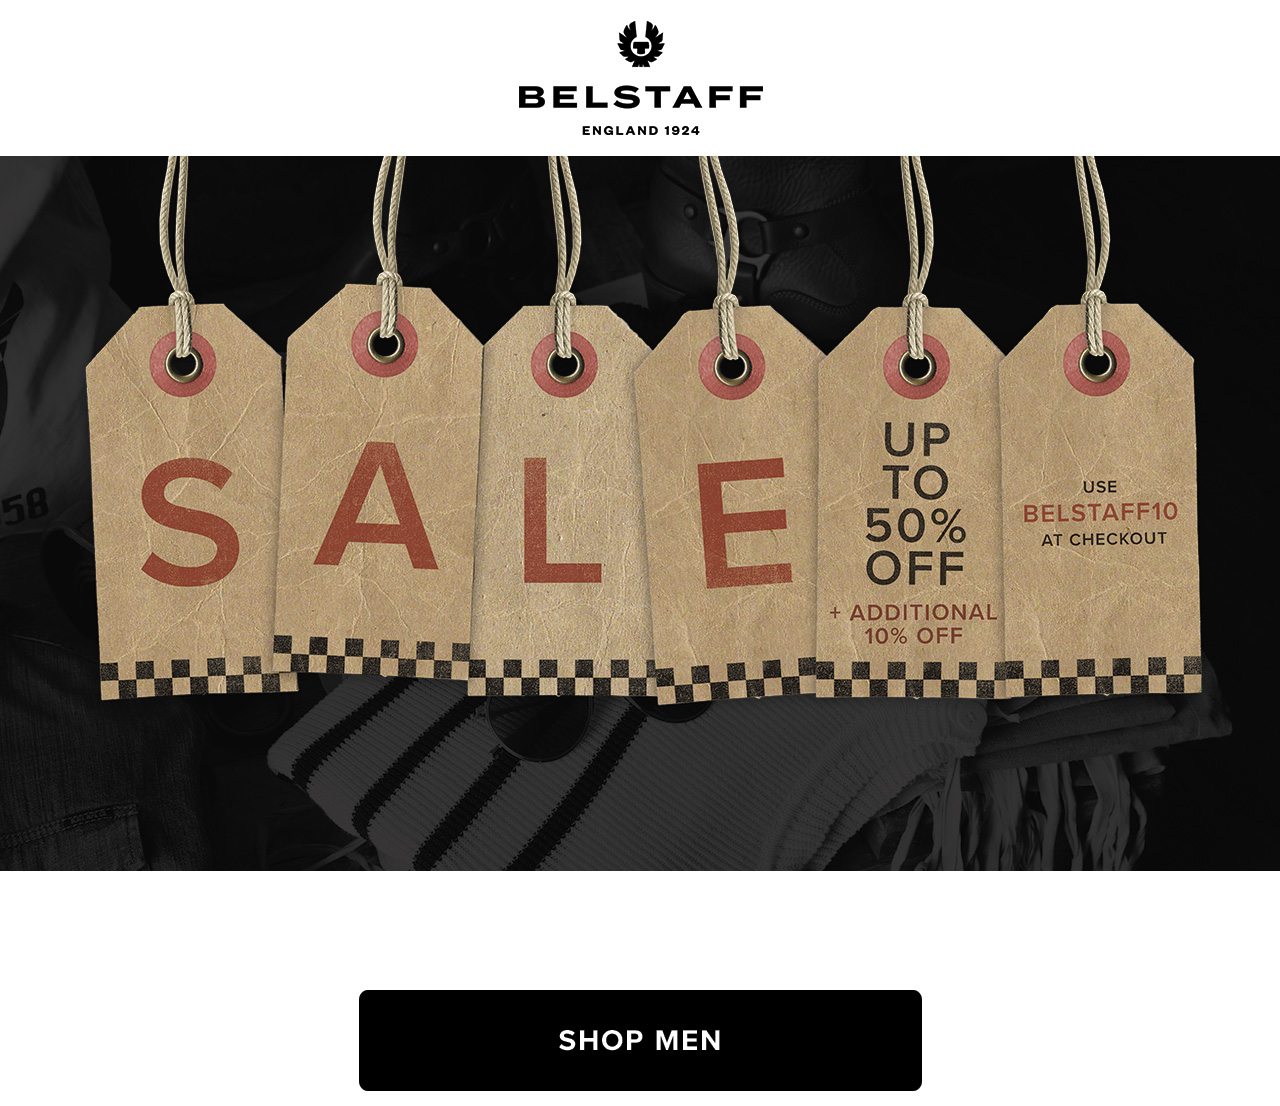 Use code BELSTAFF10 at checkout to get an extra 10% off sale styles.